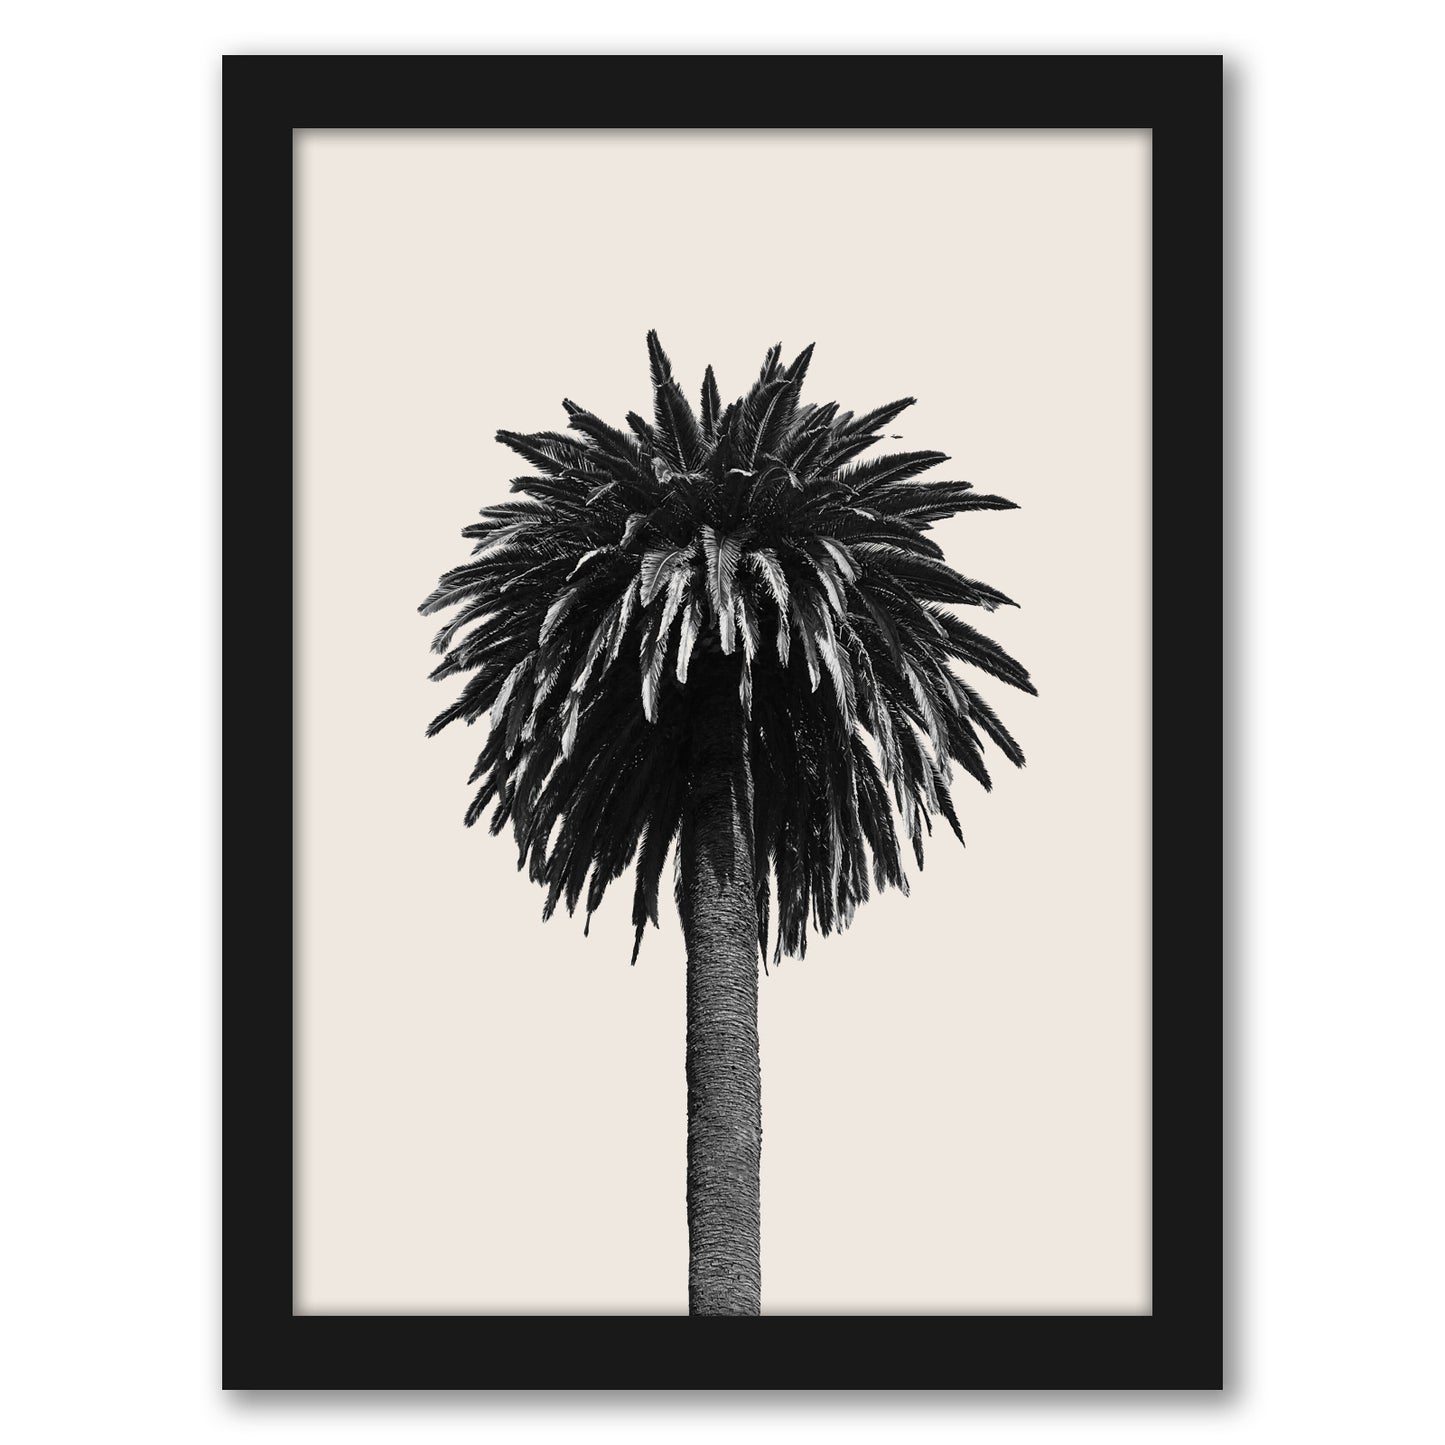 Palm Tree On Beige Background by Thomas Succes - Canvas, Poster or Framed Print